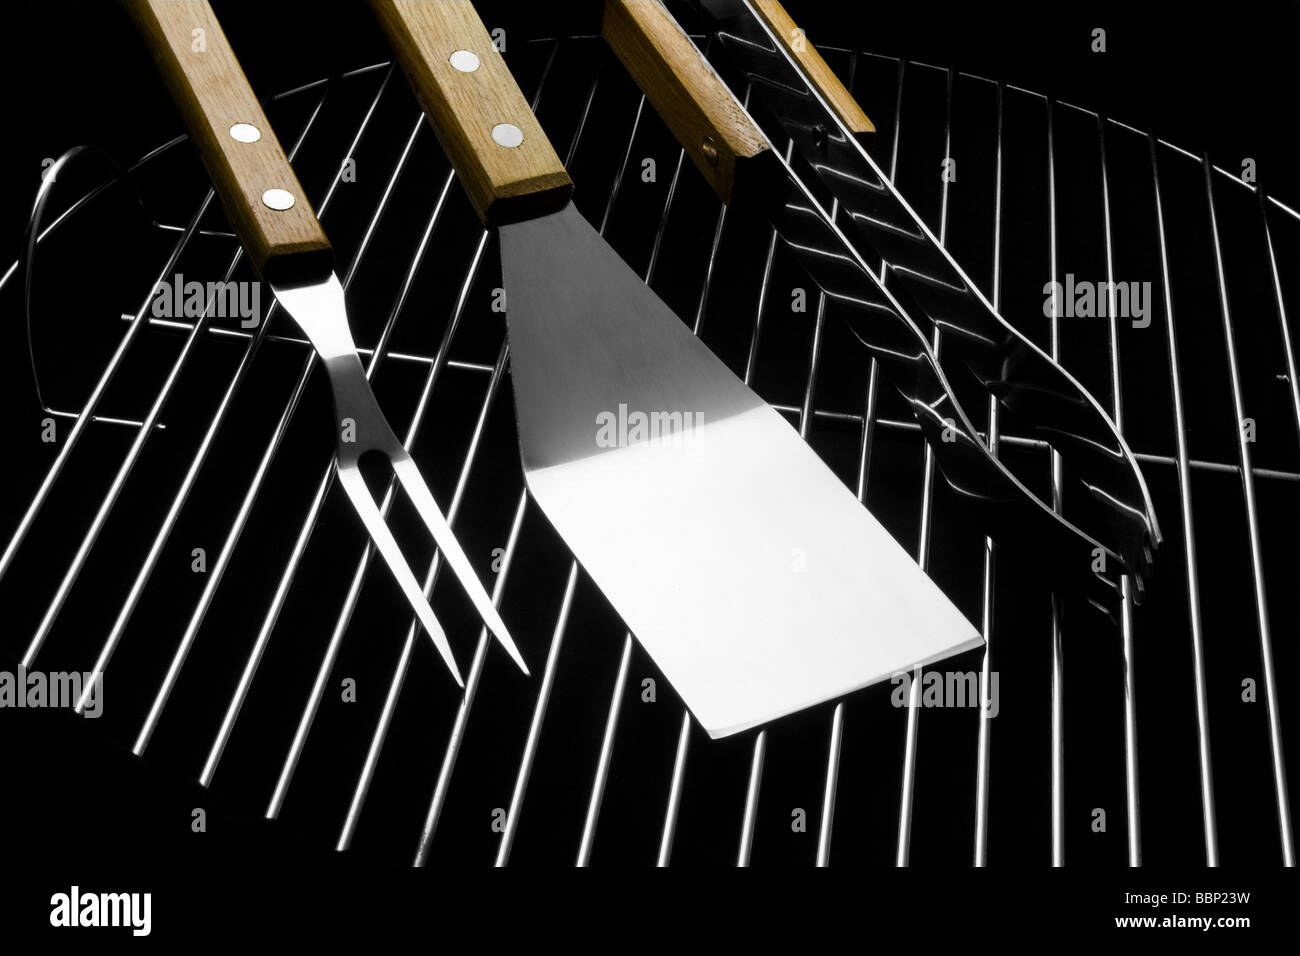 Three stainless steel barbecue utensils on grill. Fork, spatula, tongs. Studio shot on black background. Stock Photo